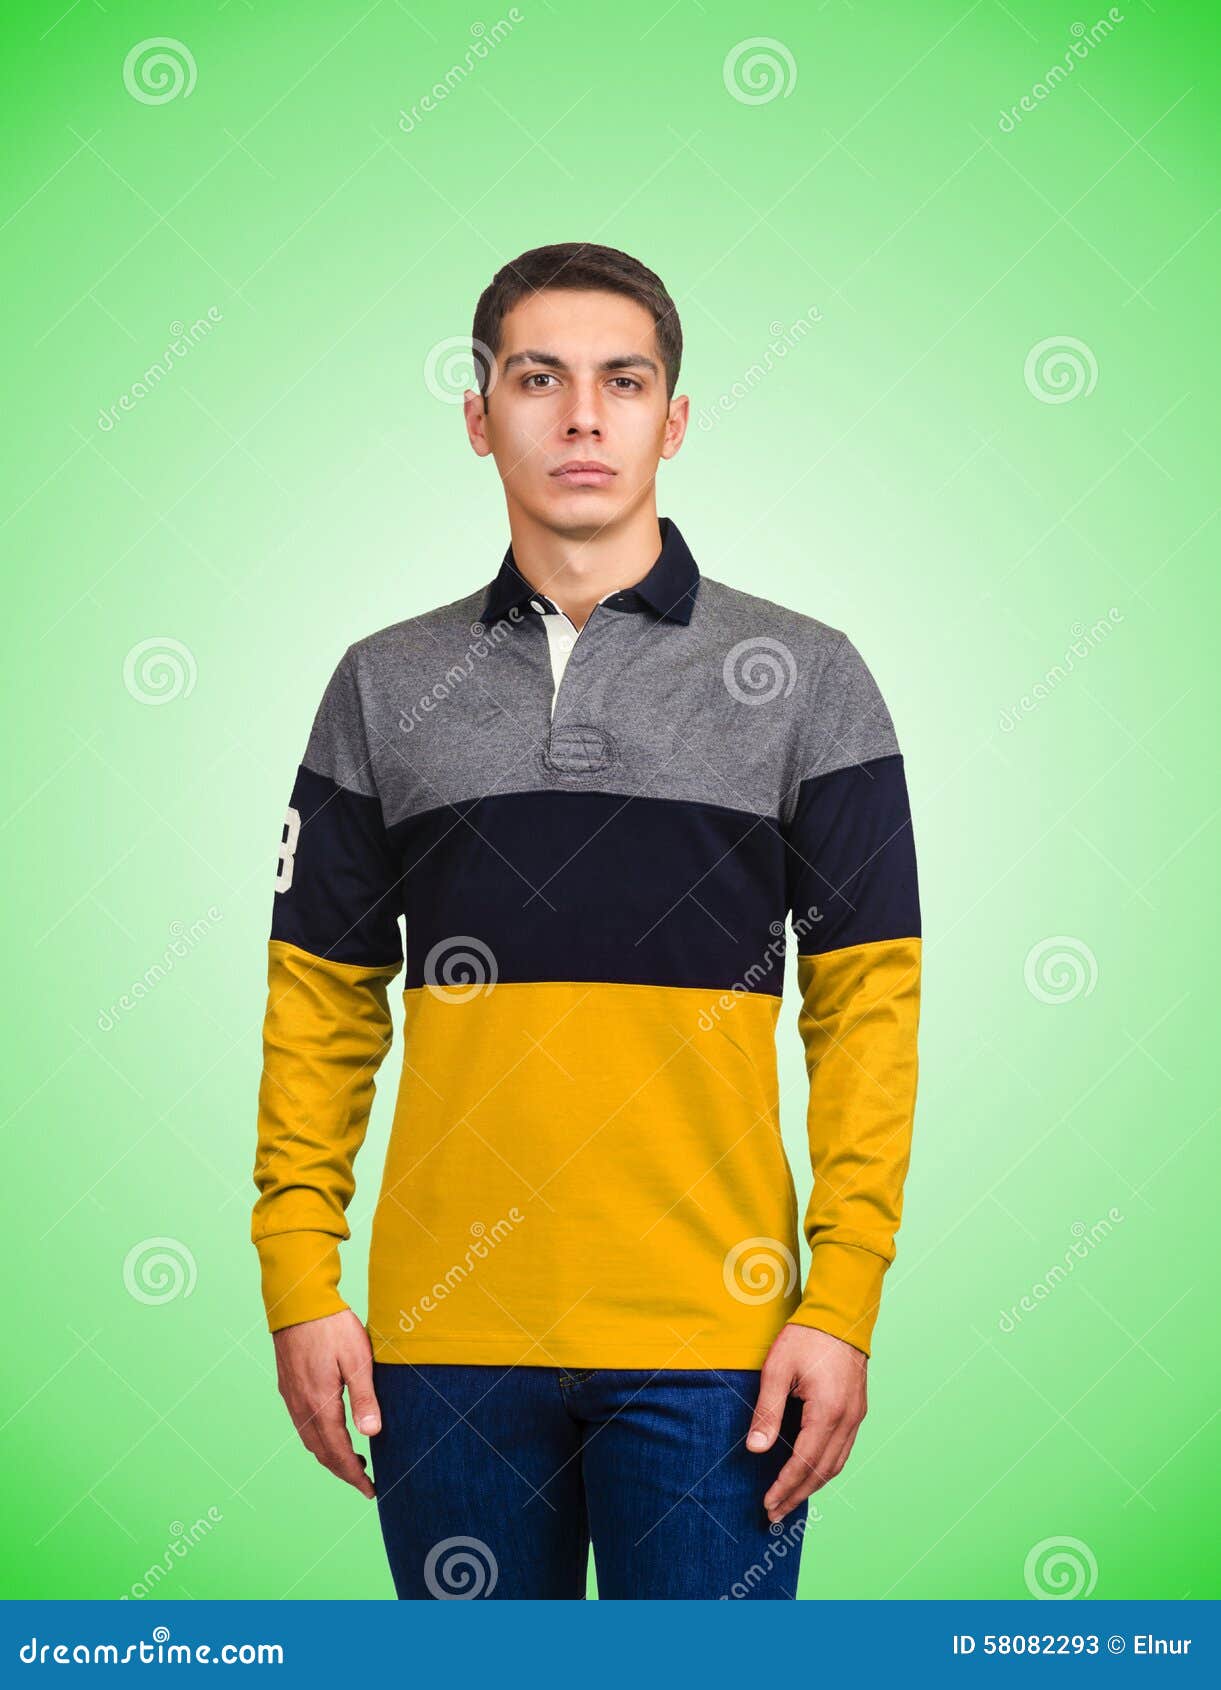 Male Sweater Isolated on the White Stock Image - Image of cool ...